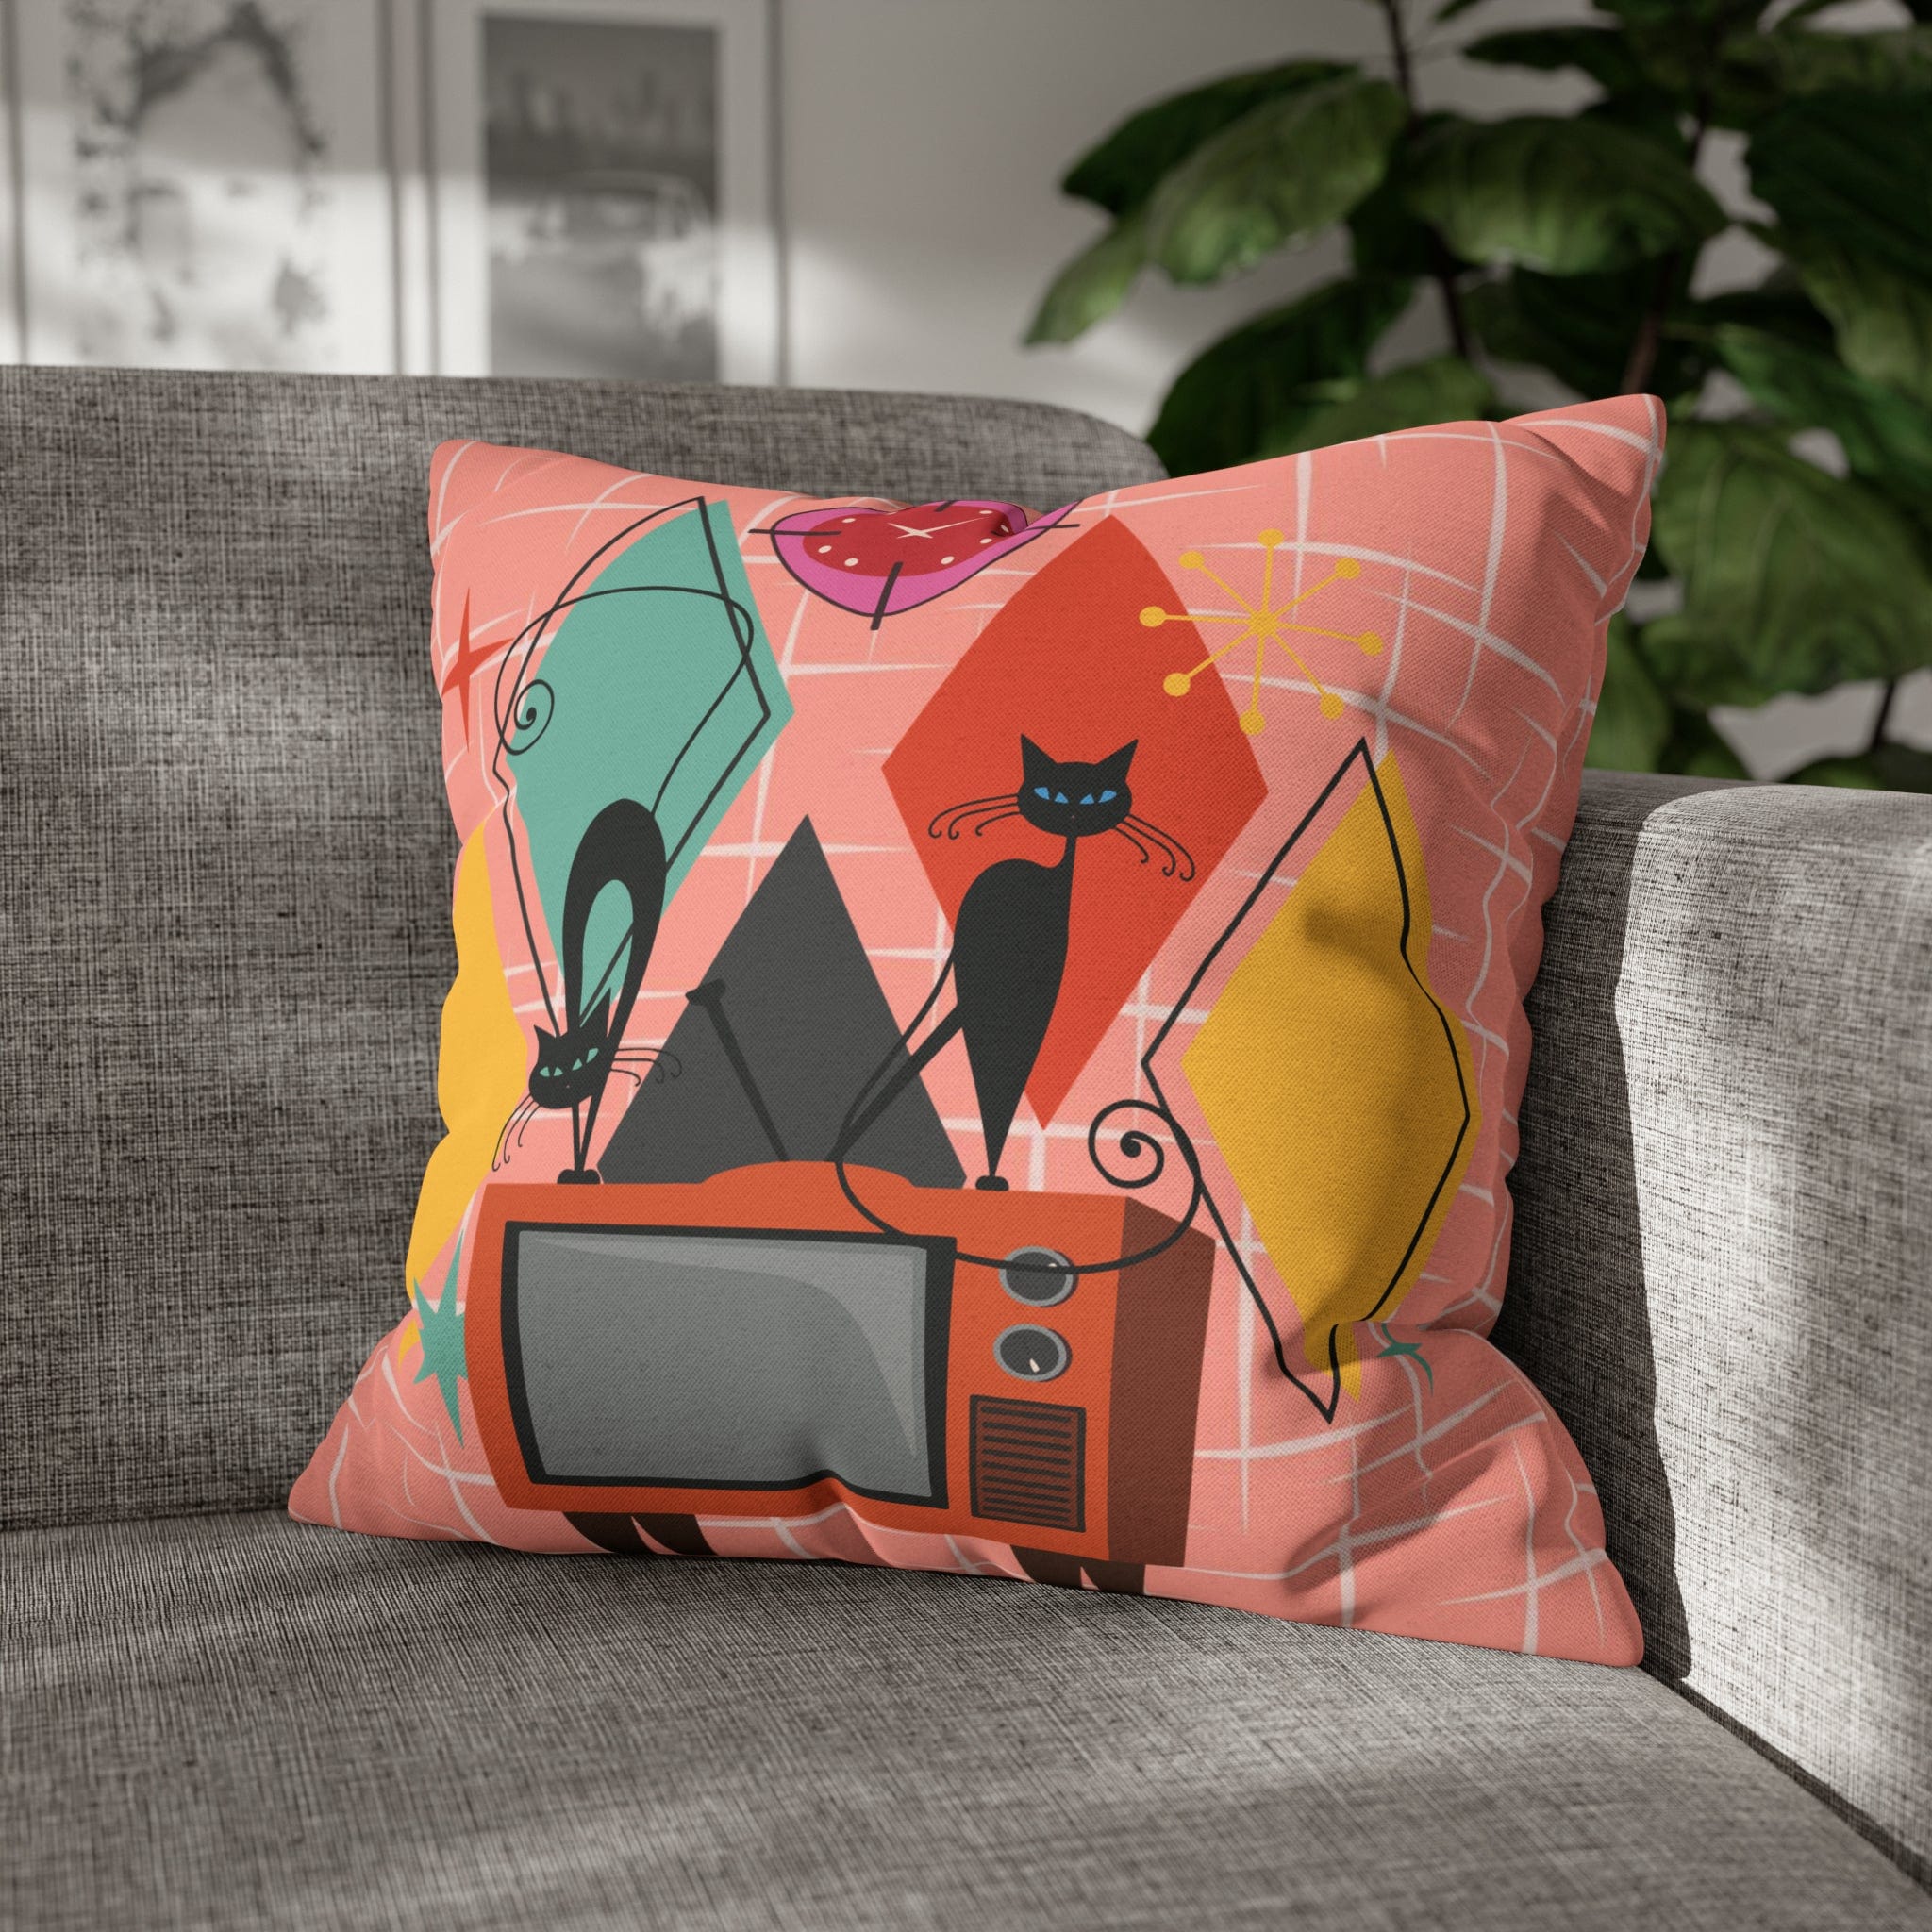 Kate McEnroe New York Atomic Cat Retro TV Pillow Cover, Mid Century Modern Orange, Teal, Yellow, Pink Cushion Covers, MCM Pillow CaseThrow Pillow Covers14505531541008926429